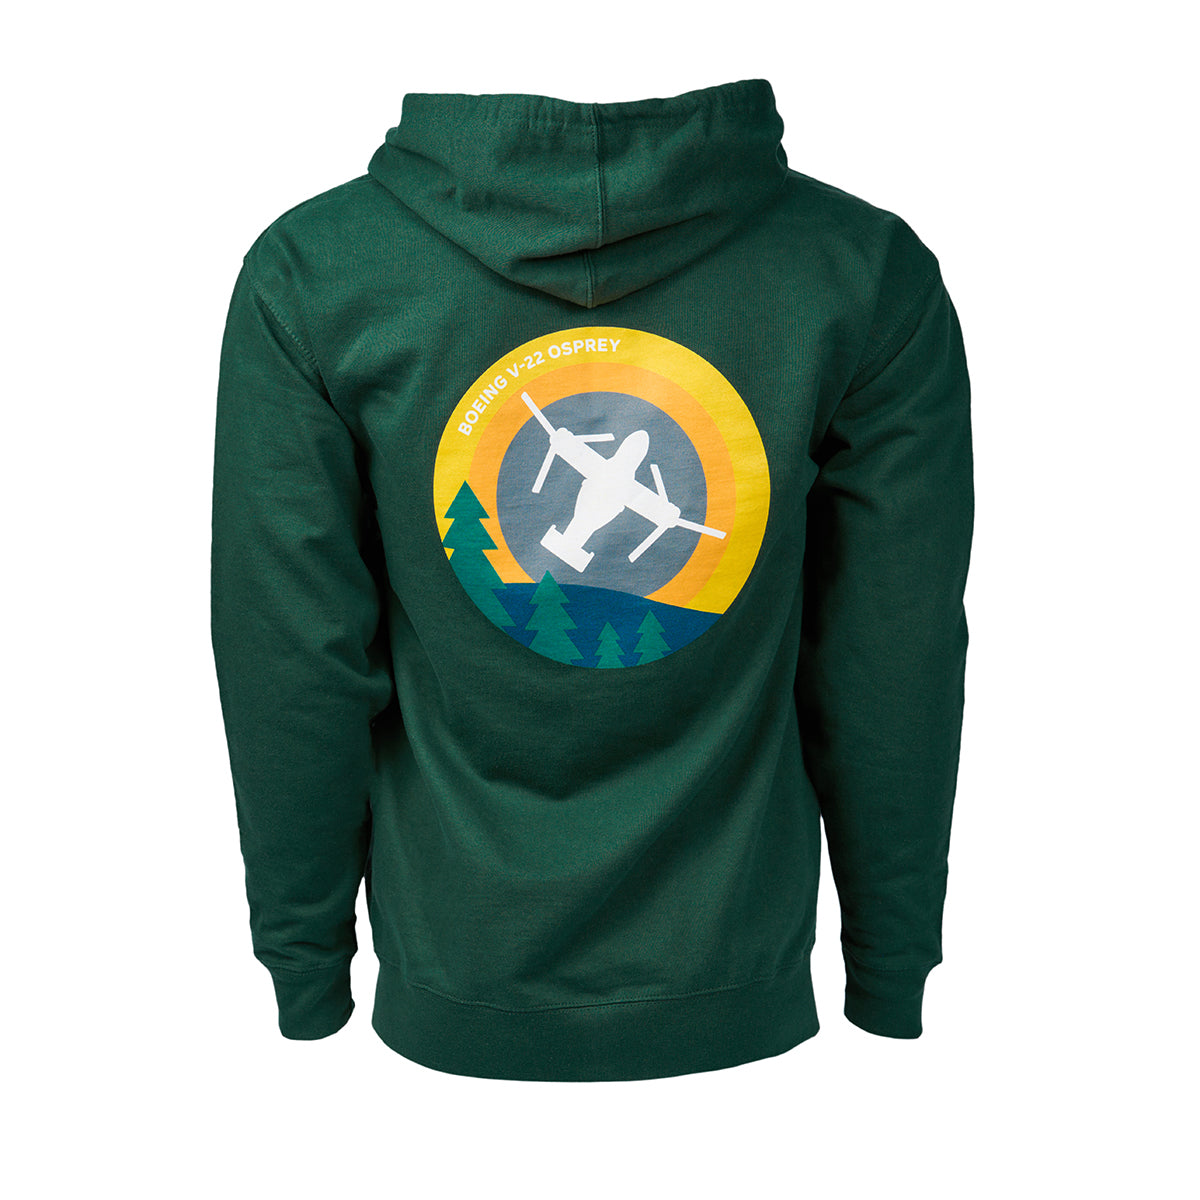 Full product image of the back side of the hooded sweatshirt in an alpine green color.  Showing the Skyward graphic of the Boeing V-22 Osprey.